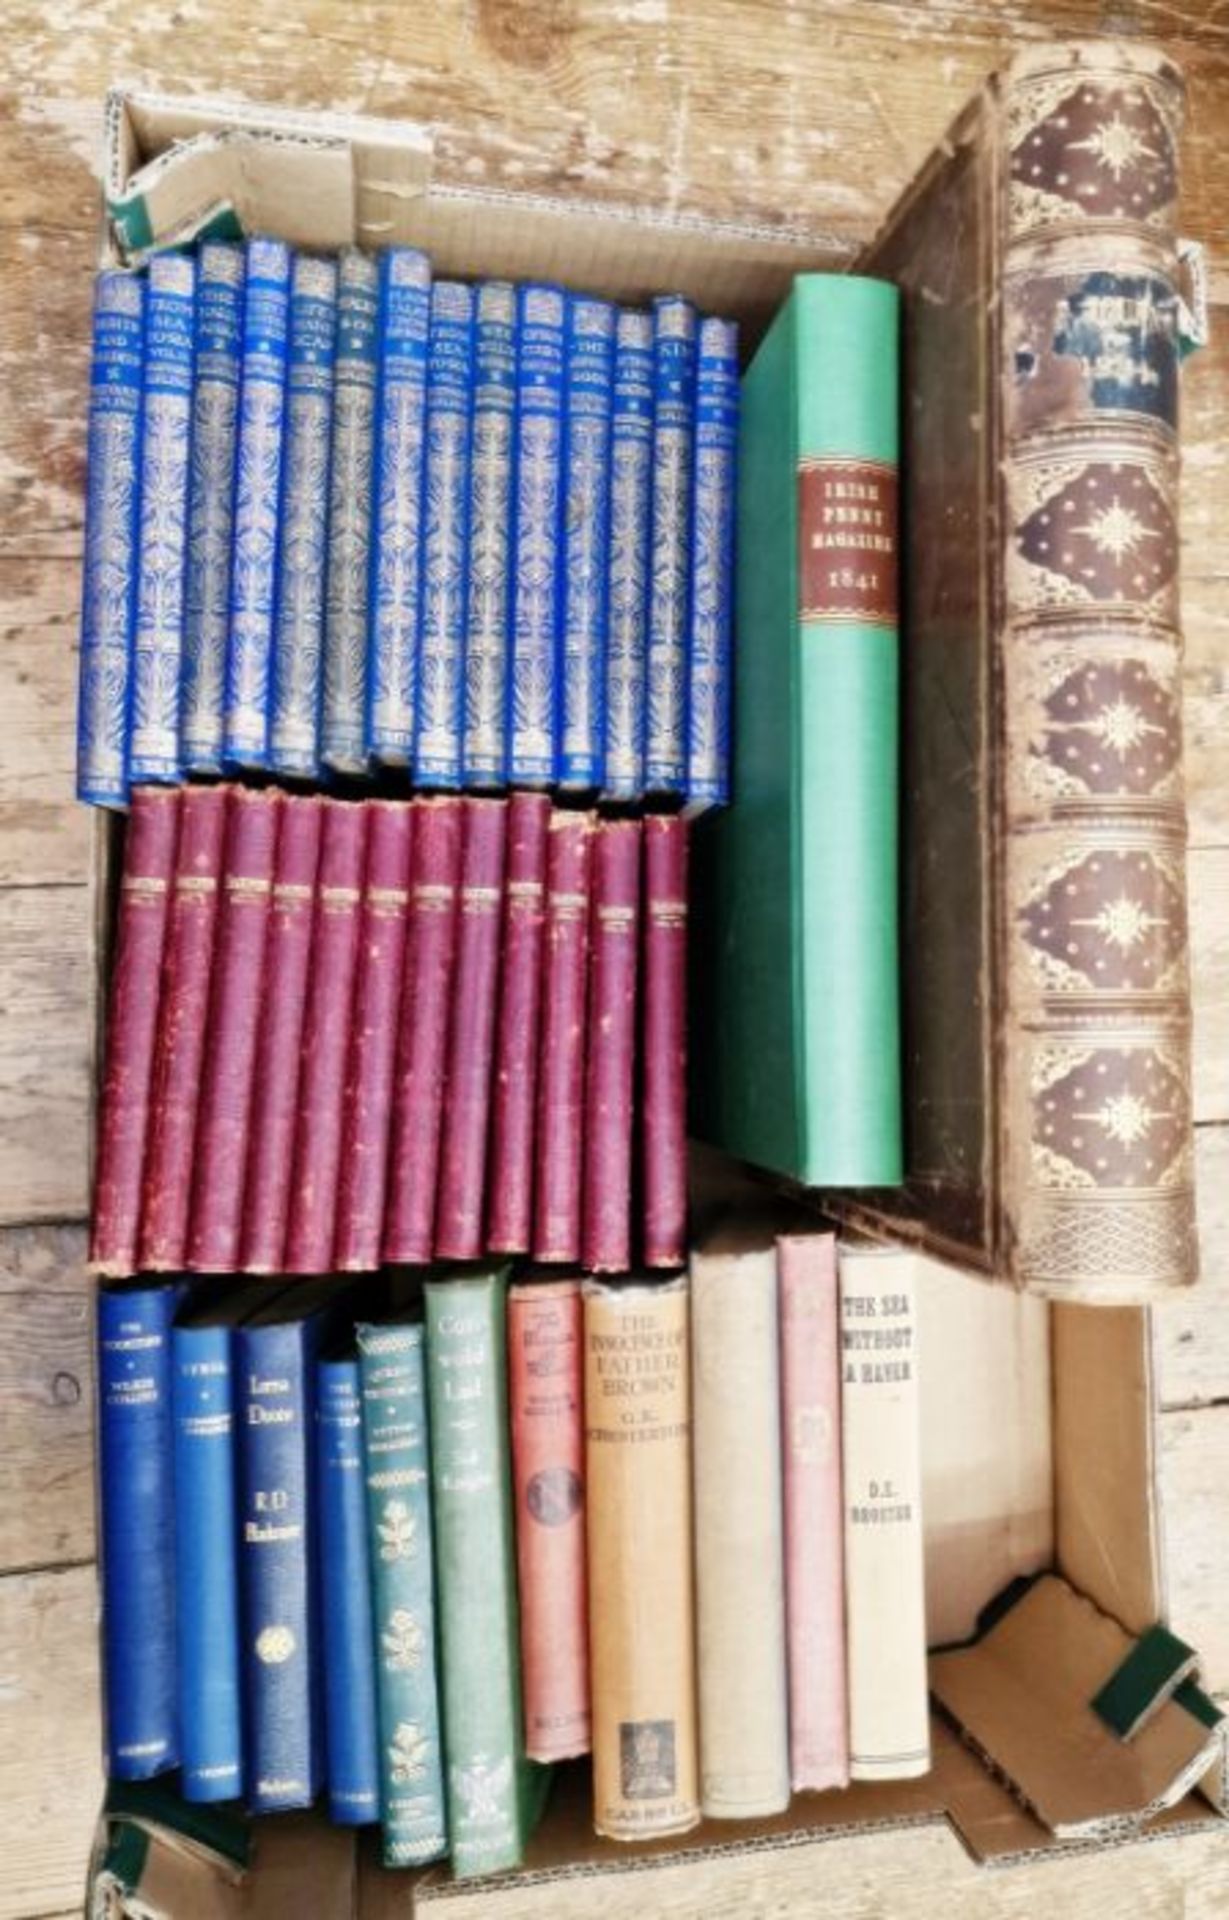 Macmillans Pocket Kipling, 14 vols, blue cloth with gilt decorations and titles to backstrip - Image 2 of 8